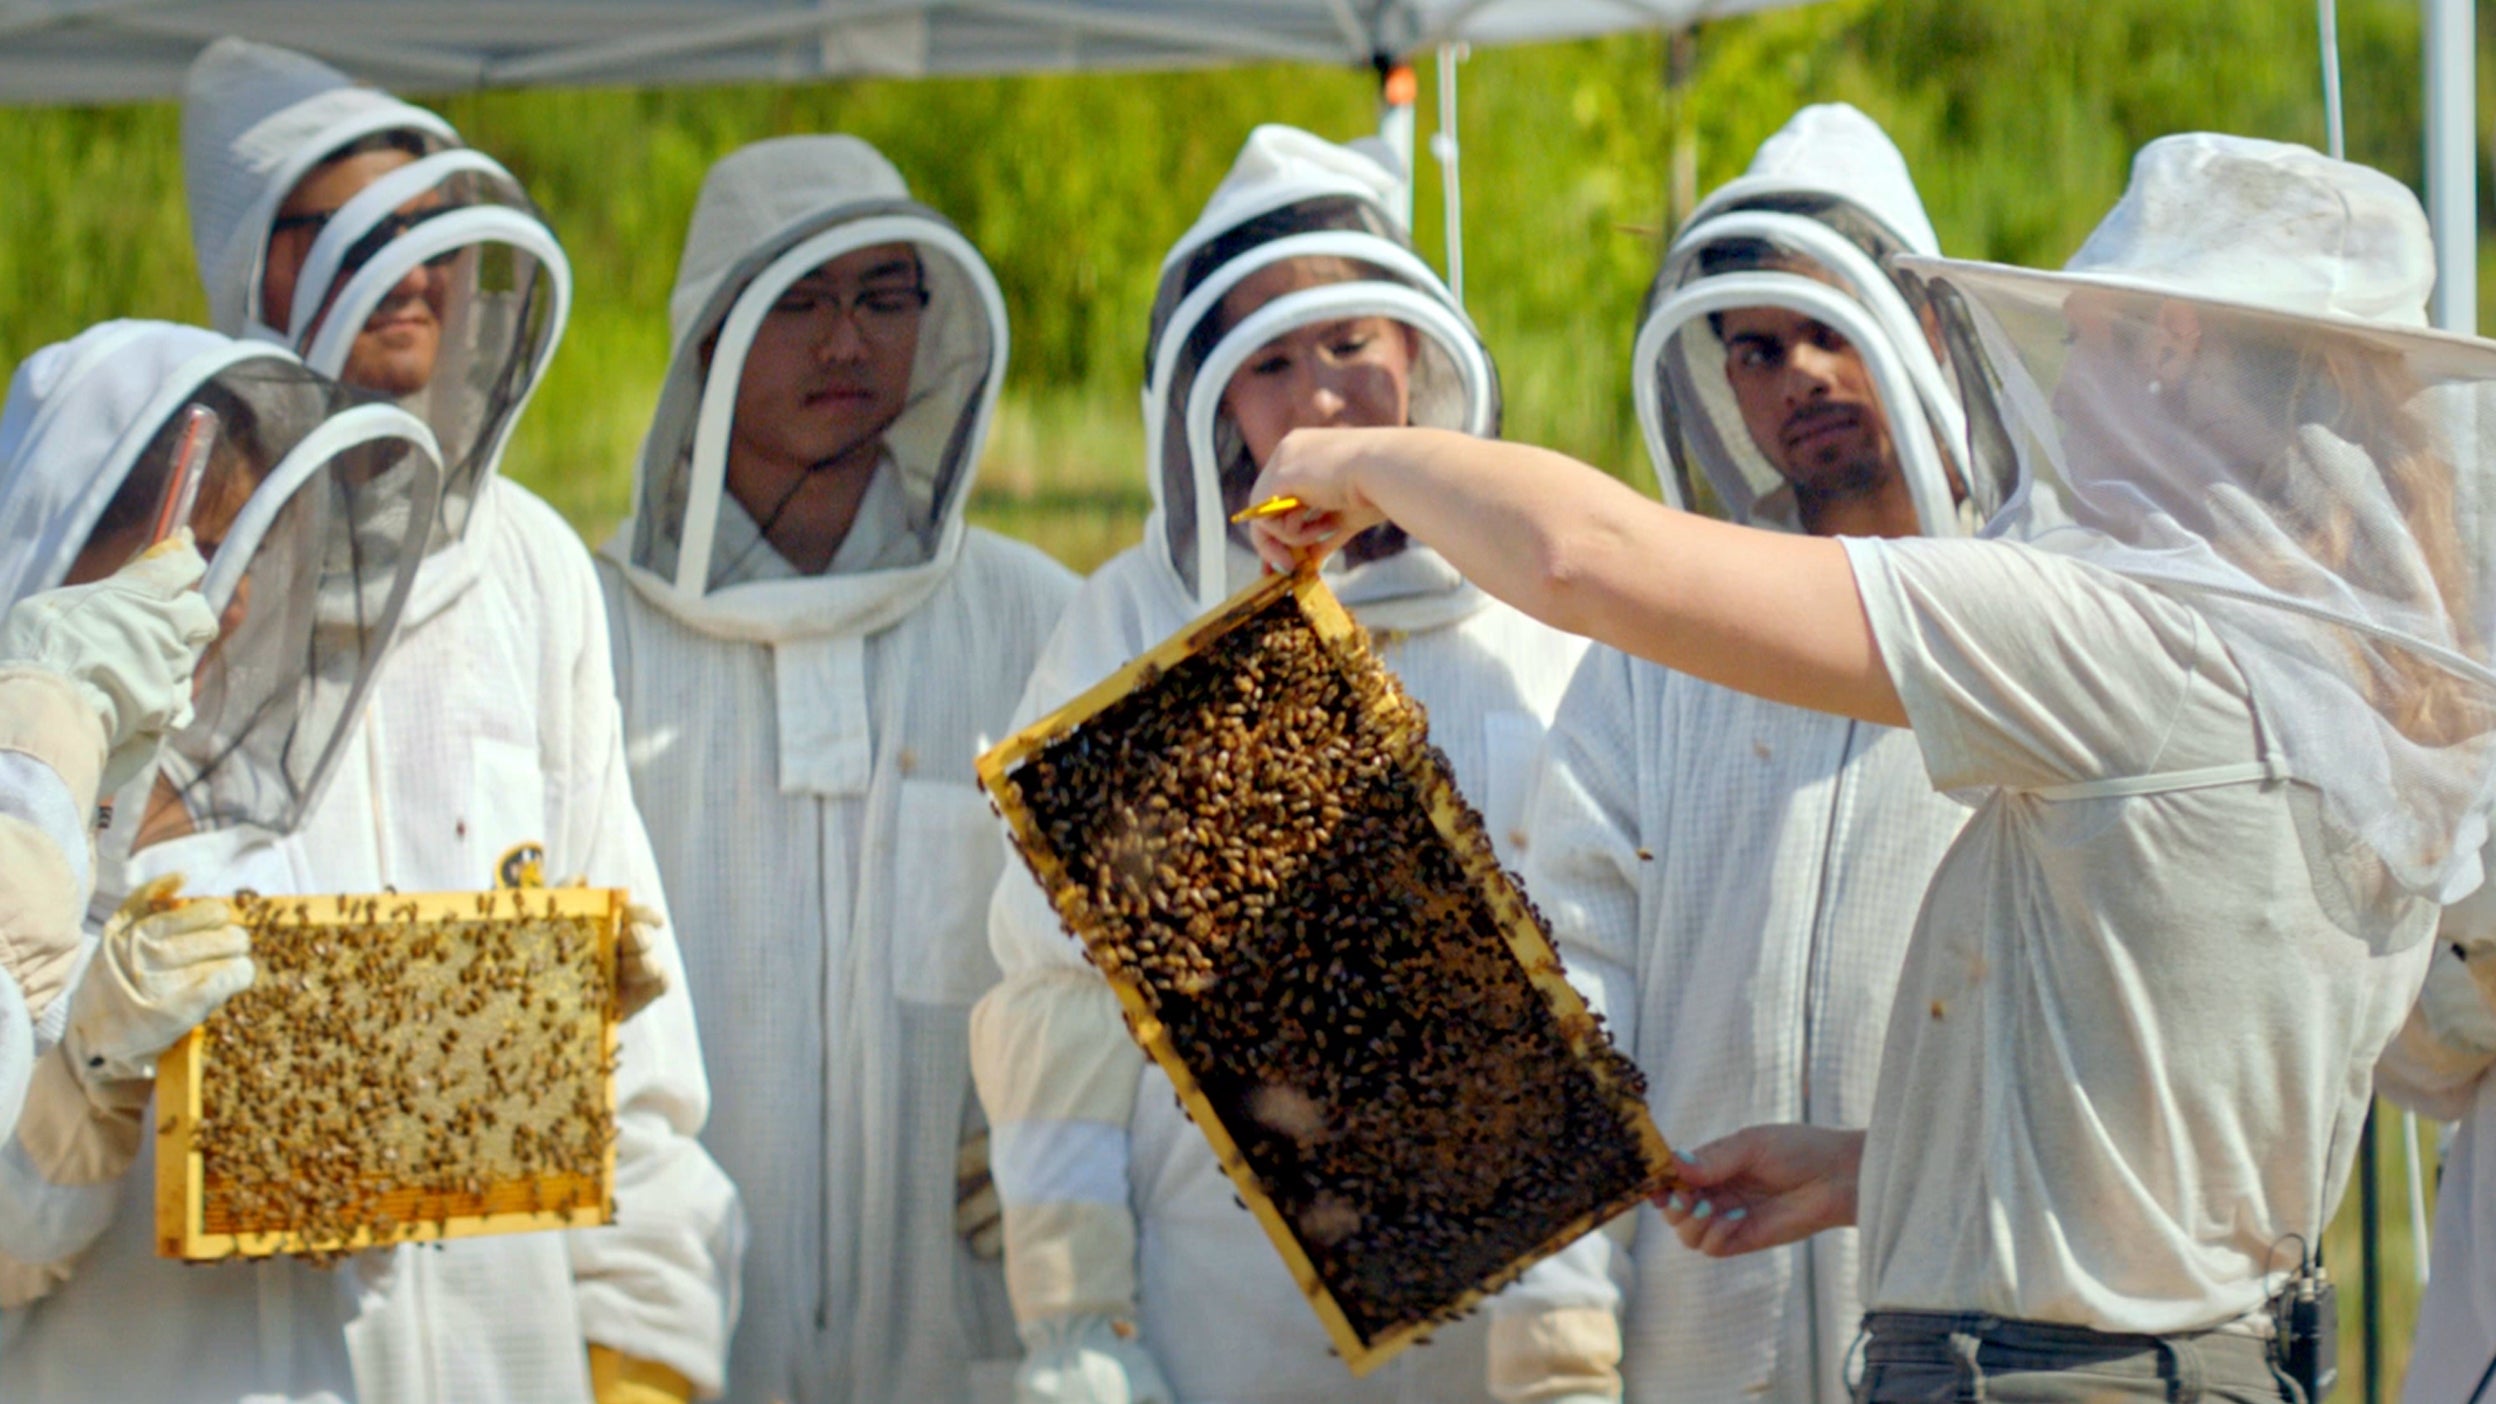 Leigh-Kathryn Bonner of Bee Downtown teaching others bees. Bee Downtown is featured in Invesco's Innovation Now series.